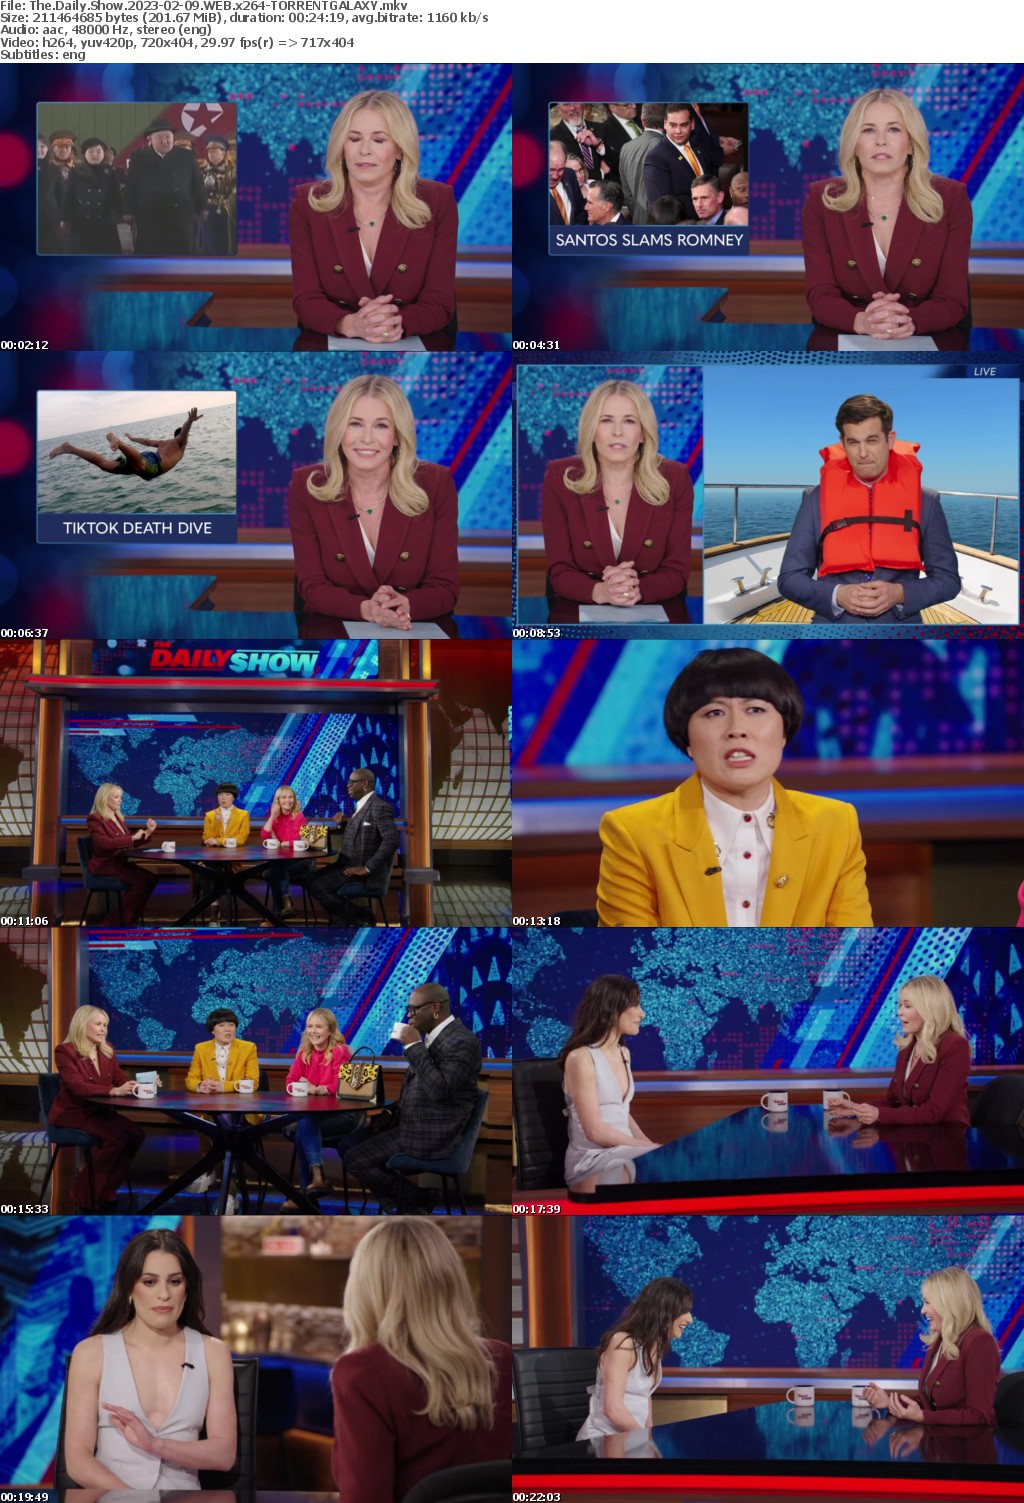 The Daily Show 2023-02-09 WEB x264-GALAXY